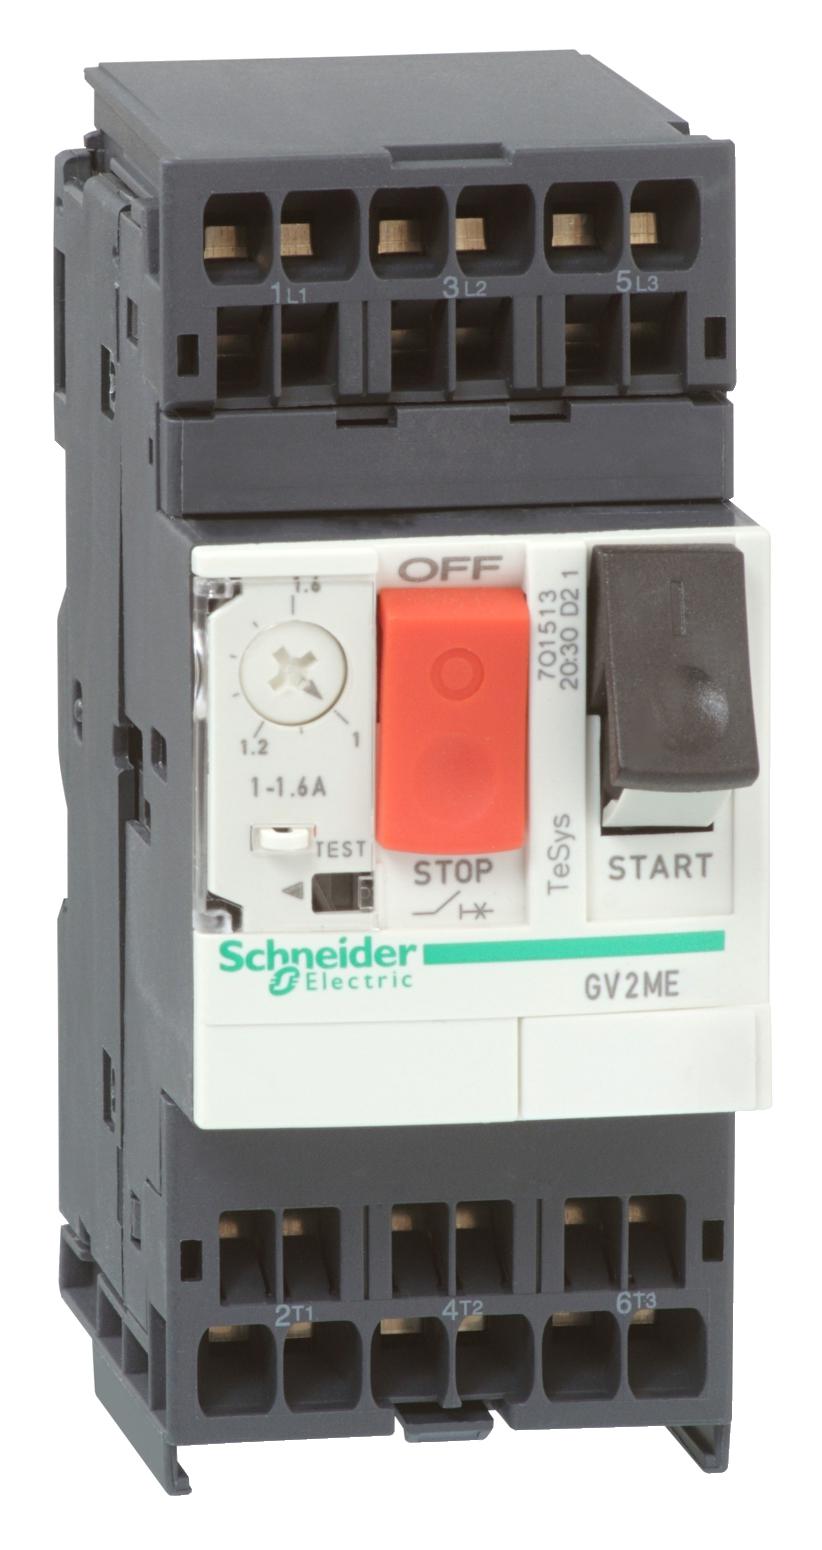 GV2ME033 THERMAL MAGNETIC CIRCUIT BREAKER SCHNEIDER ELECTRIC